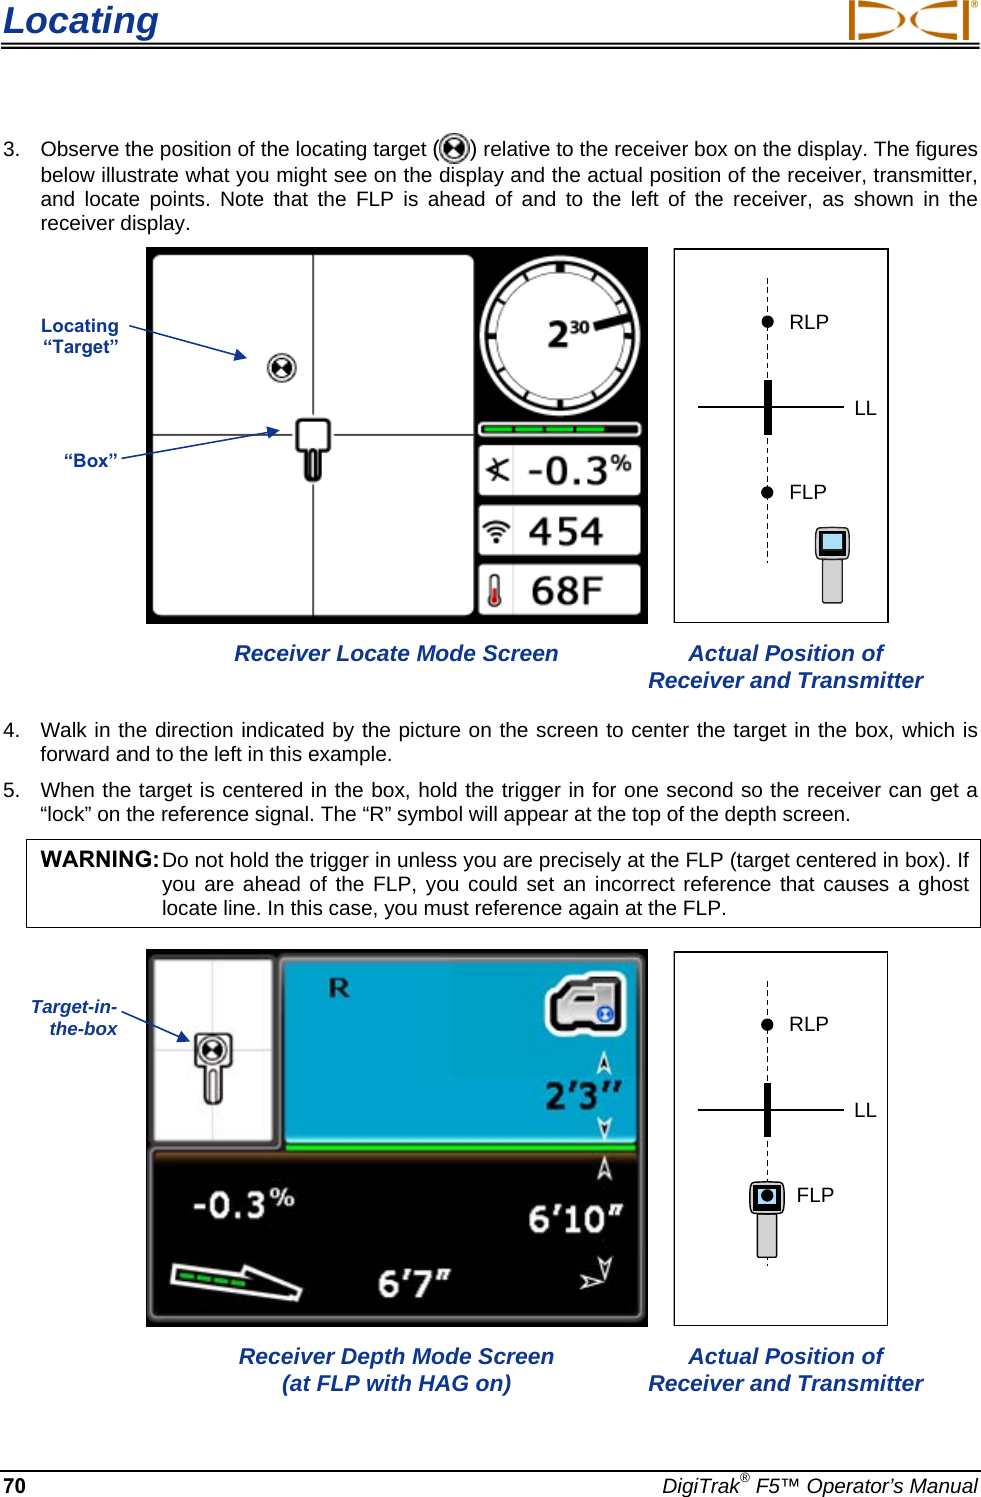 Locating     70  DigiTrak® F5™ Operator’s Manual 3.  Observe the position of the locating target ( ) relative to the receiver box on the display. The figures below illustrate what you might see on the display and the actual position of the receiver, transmitter, and locate points. Note that the FLP is ahead of and to the left of the receiver, as shown in the receiver display.   RLPFLPLL Receiver Locate Mode Screen  Actual Position of Receiver and Transmitter 4.  Walk in the direction indicated by the picture on the screen to center the target in the box, which is forward and to the left in this example. 5.  When the target is centered in the box, hold the trigger in for one second so the receiver can get a “lock” on the reference signal. The “R” symbol will appear at the top of the depth screen.  WARNING: Do not hold the trigger in unless you are precisely at the FLP (target centered in box). If you are ahead of the FLP, you could set an incorrect reference that causes a ghost locate line. In this case, you must reference again at the FLP.    RLPFLPLL Receiver Depth Mode Screen  (at FLP with HAG on)  Actual Position of Receiver and Transmitter Locating “Target” “Box” Target-in-the-box  